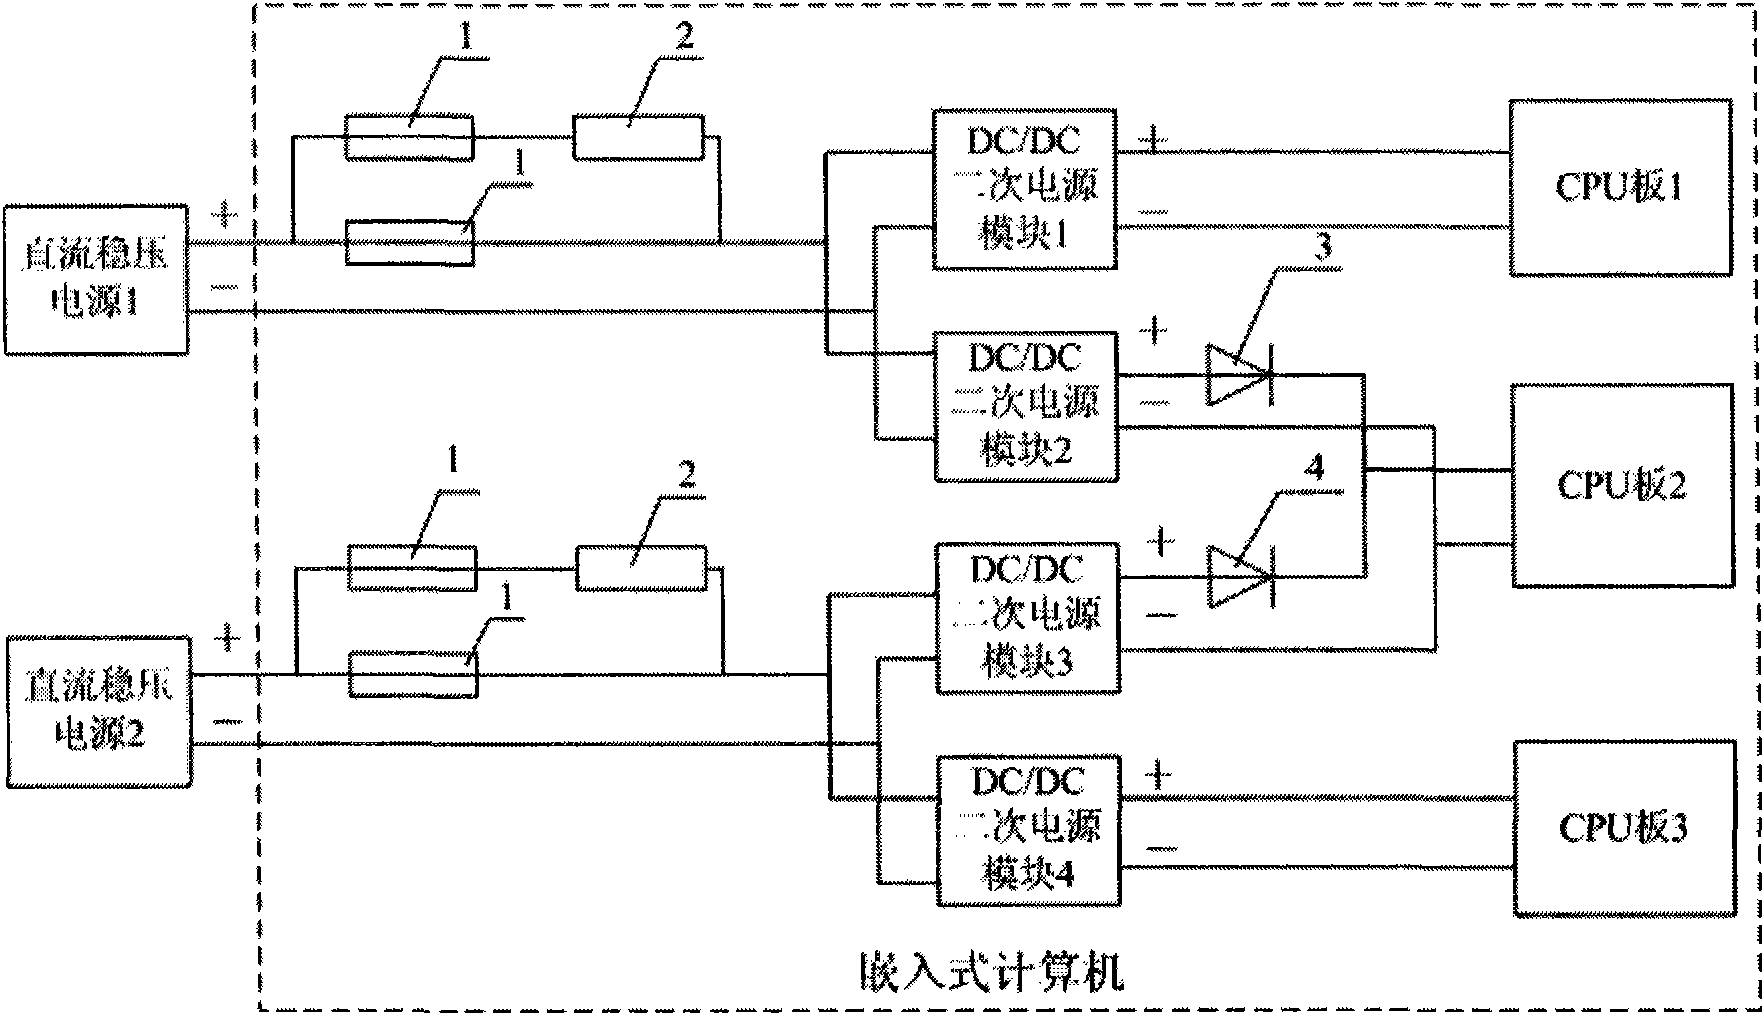 Reliable power supply circuit of triple redundancy embedded computer system